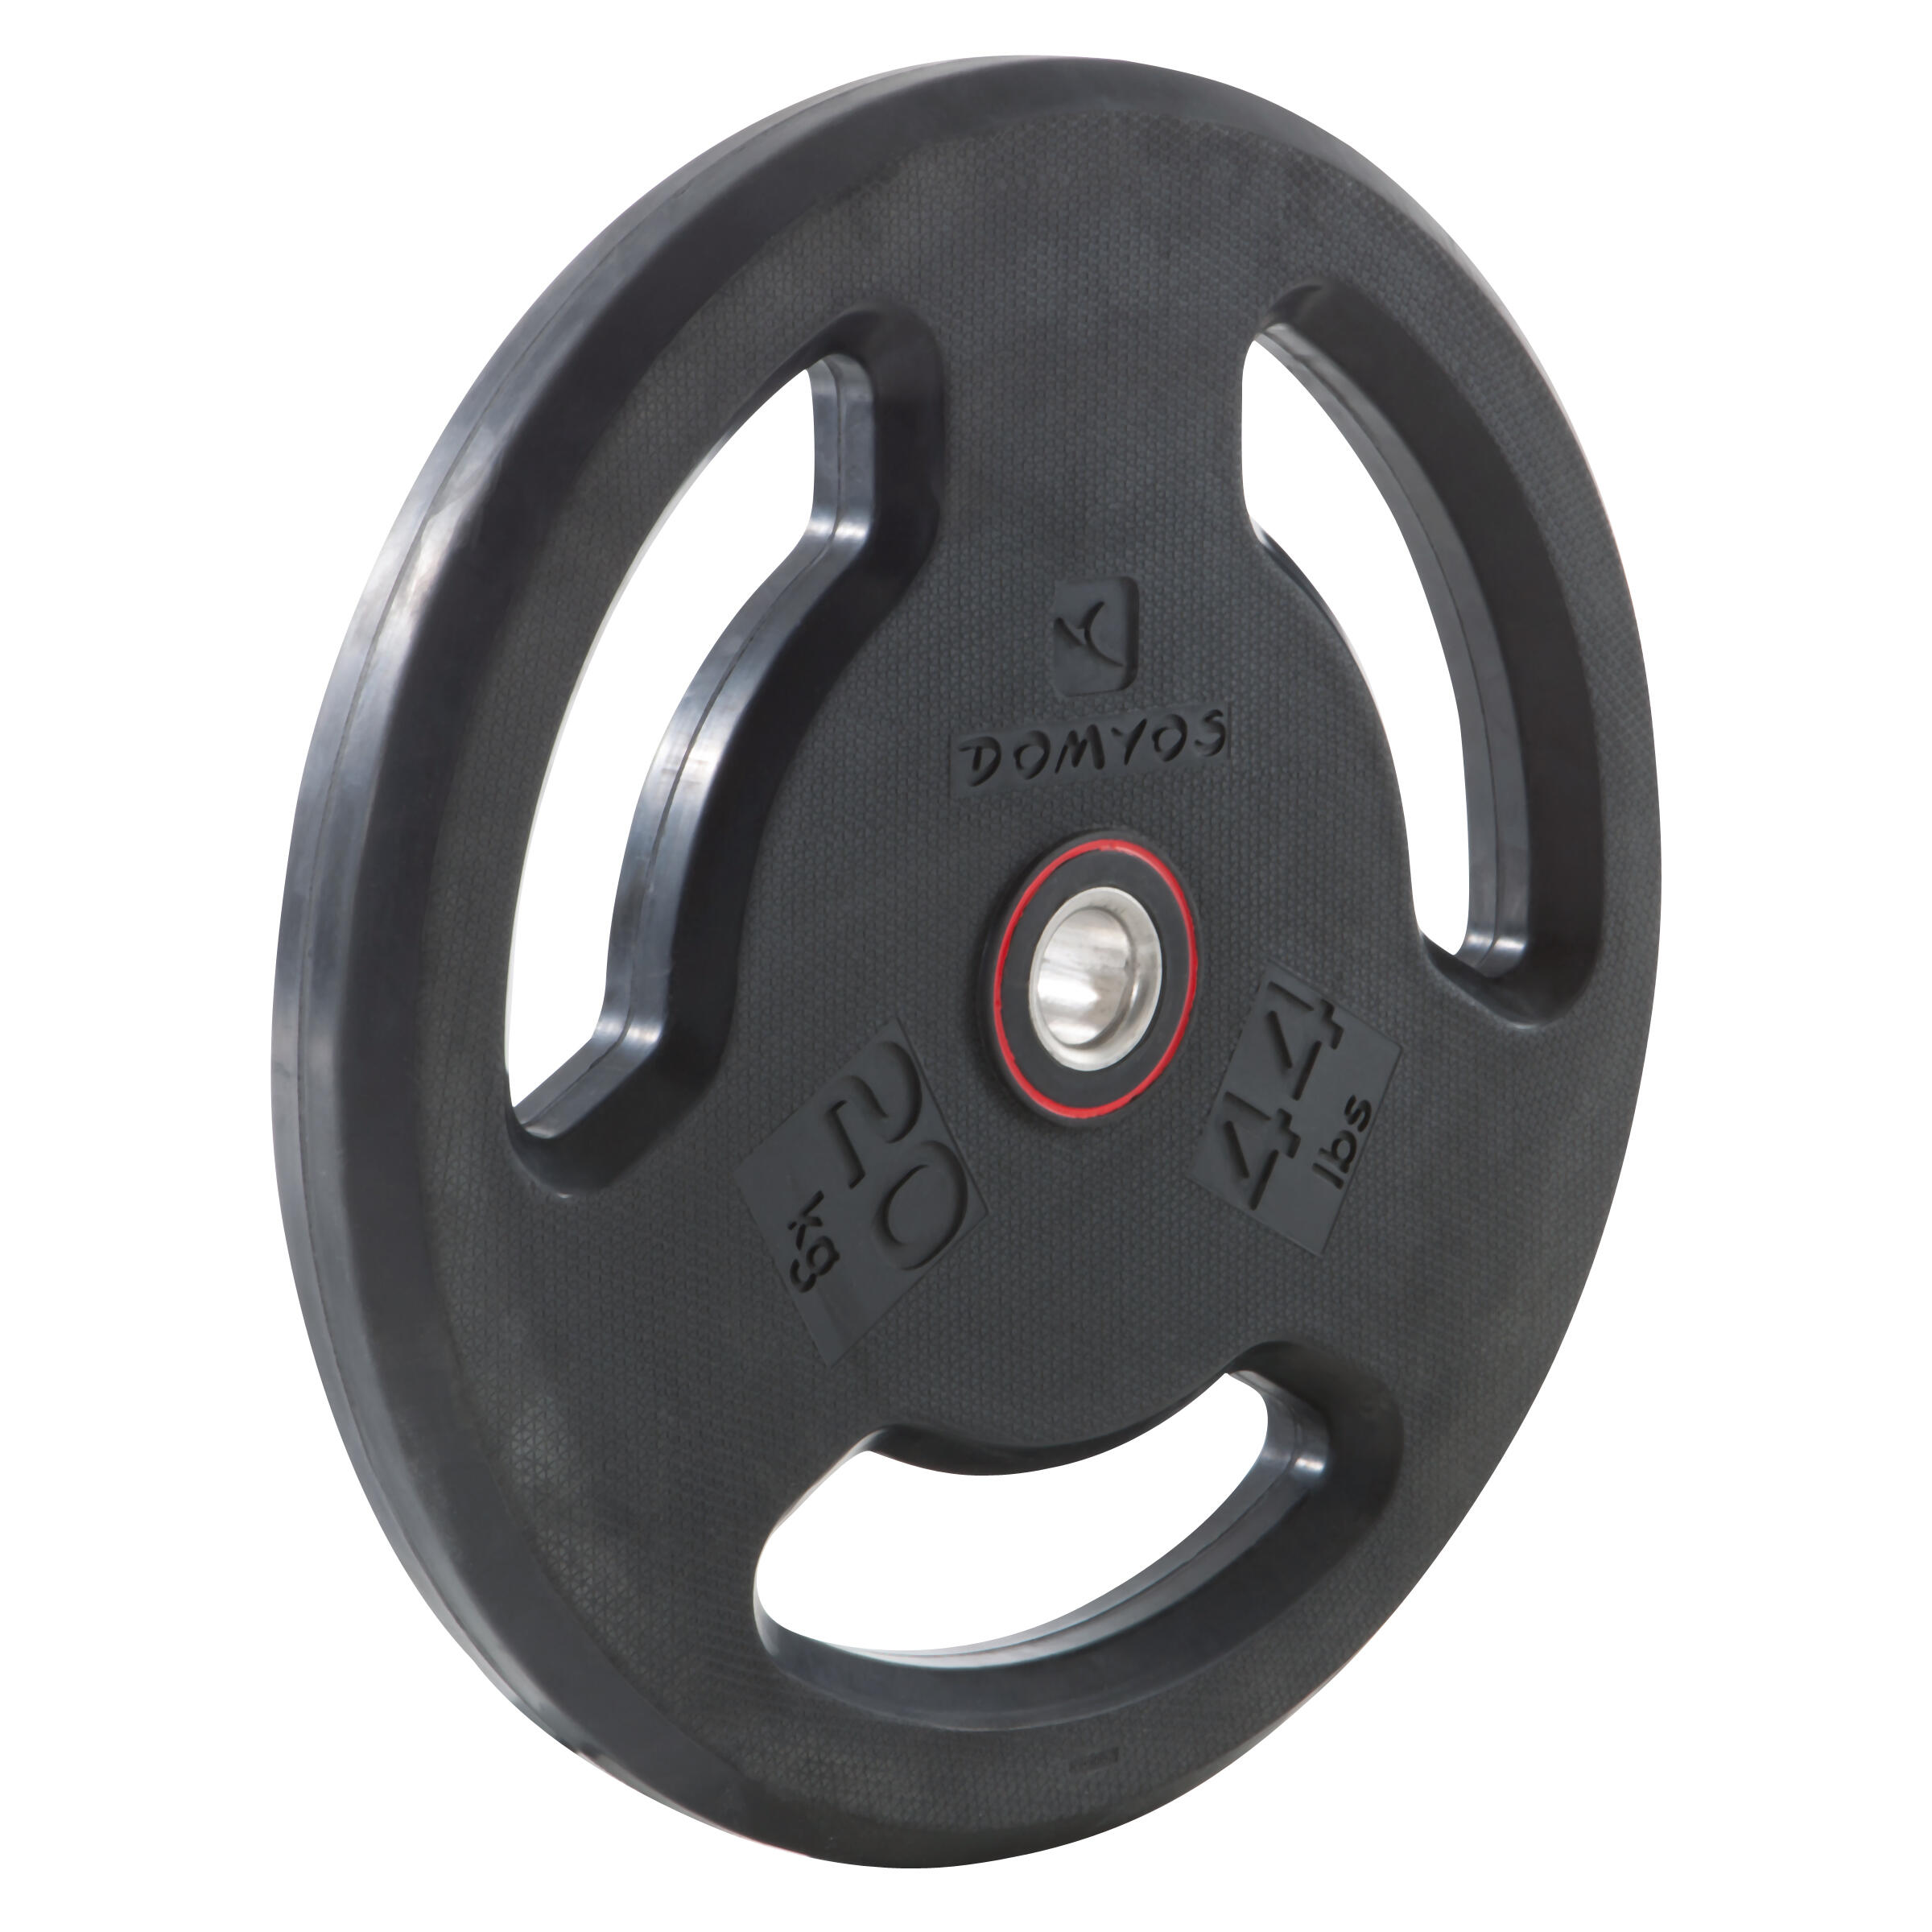 20 kg (44 lb) Rubber Weight Plate with Handles - CORENGTH